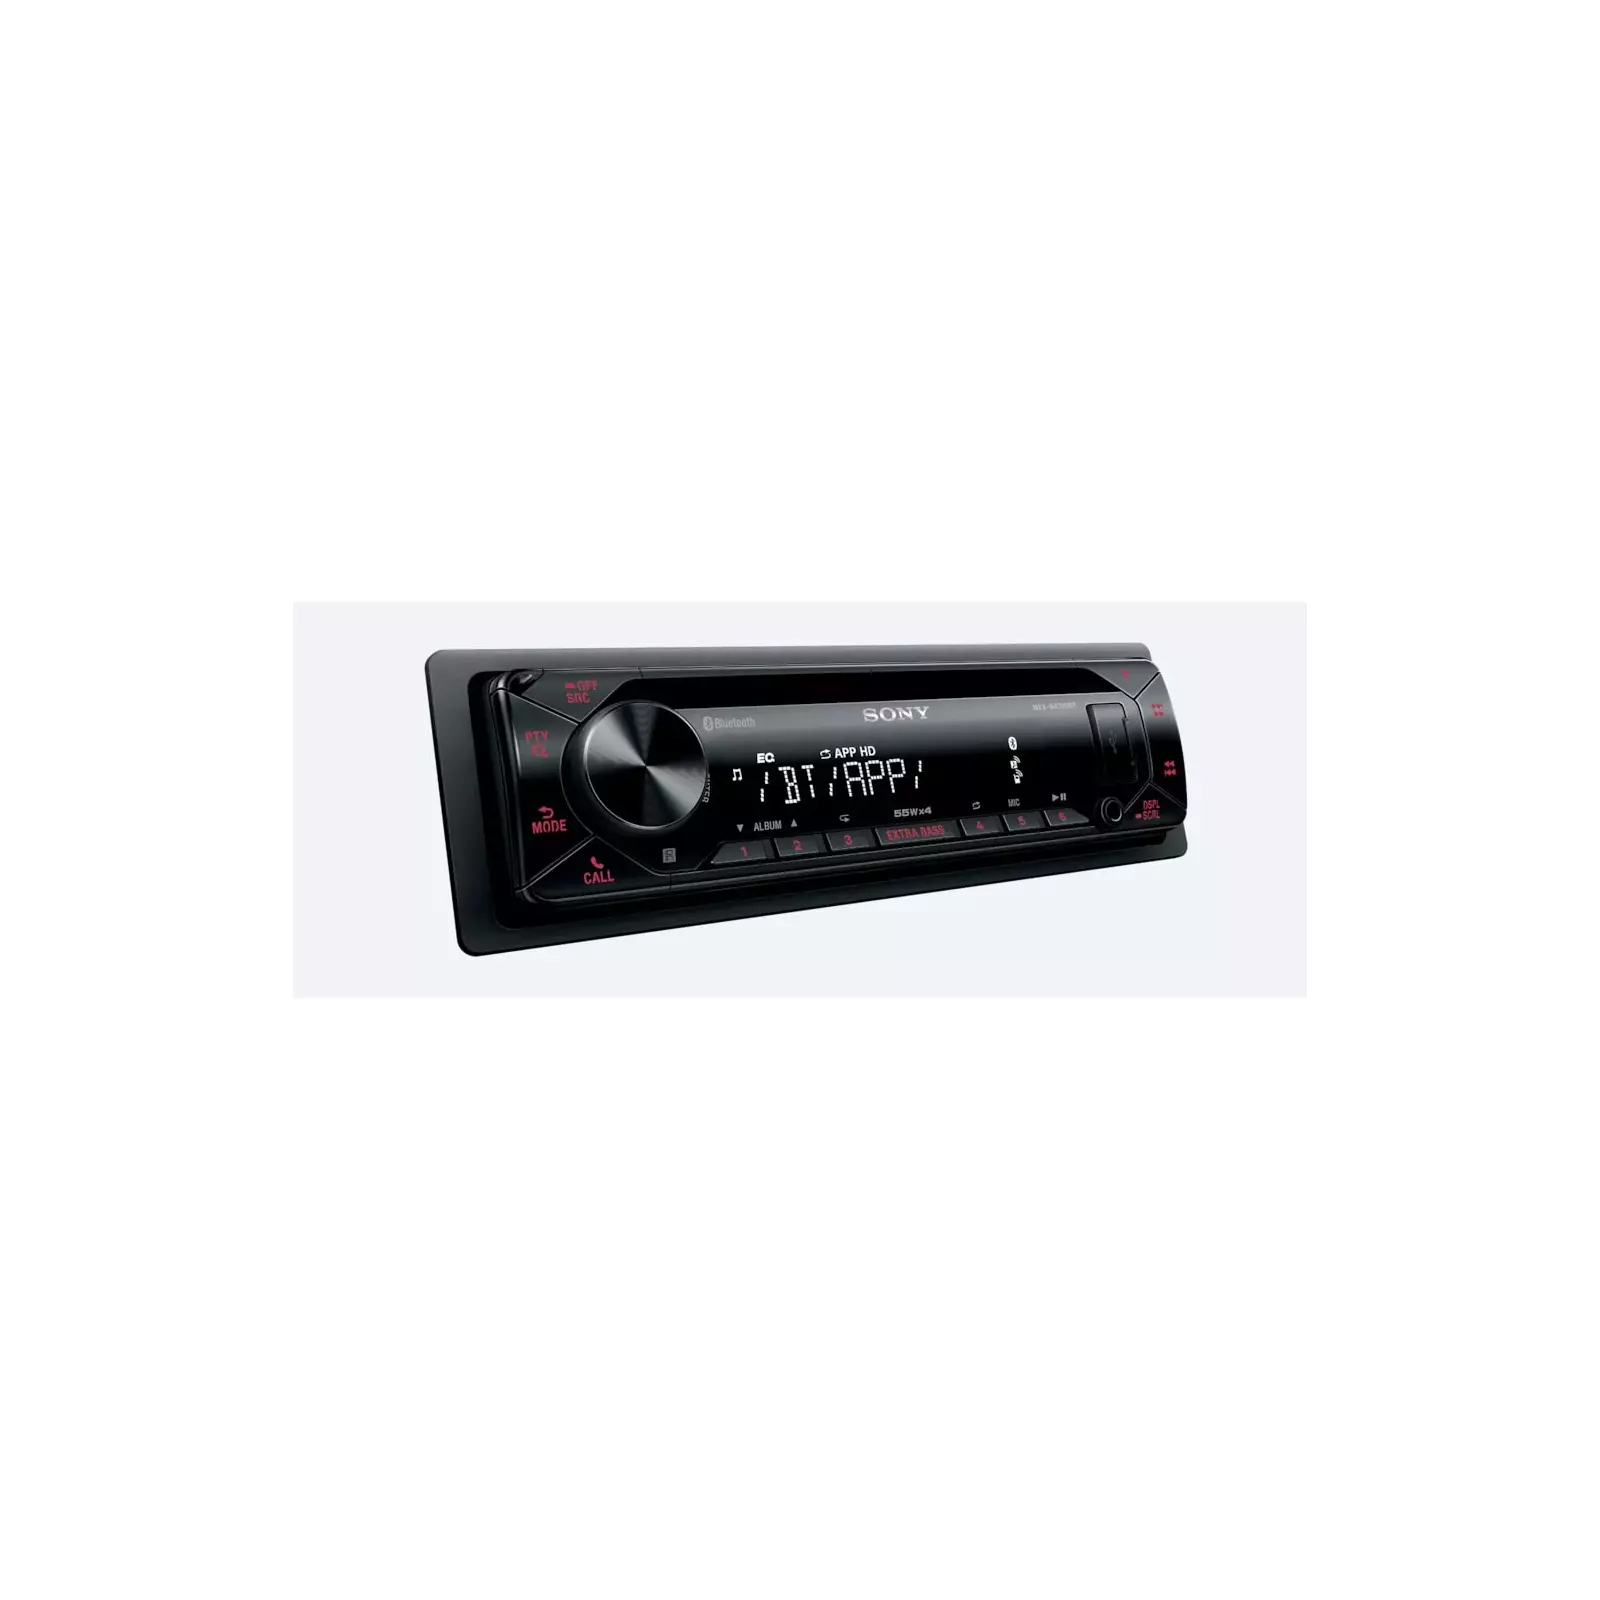 Sony MEX-N4300BT CD STEREO with Bluetooth hands-free calling